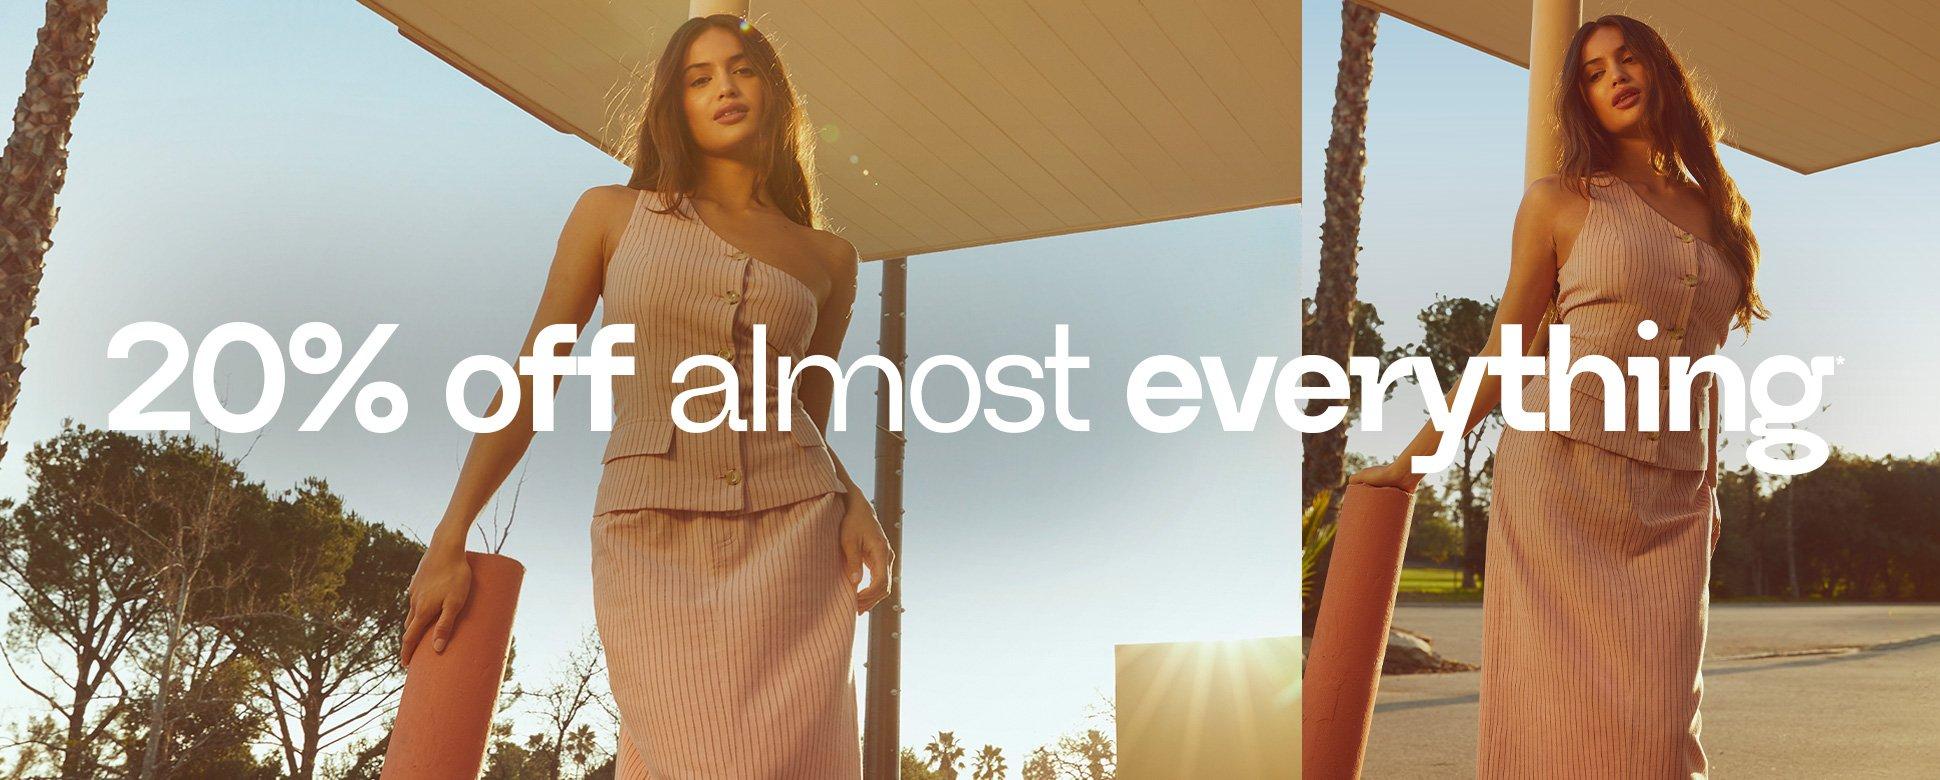 20% Off Almost Everything!